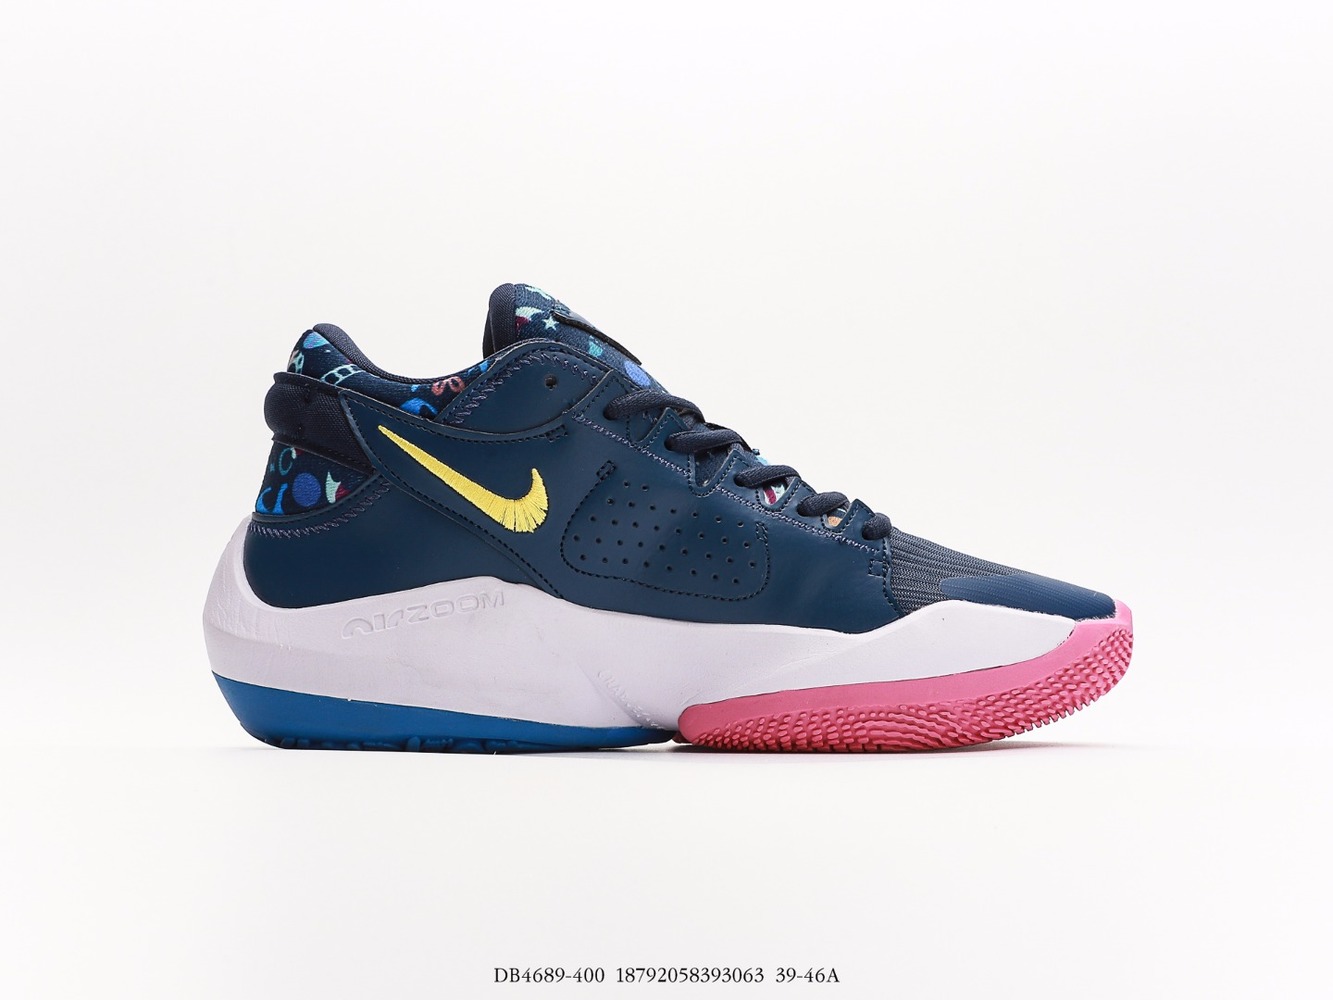 Nike Zoom Freak 2 Superstitious_DB4689-400